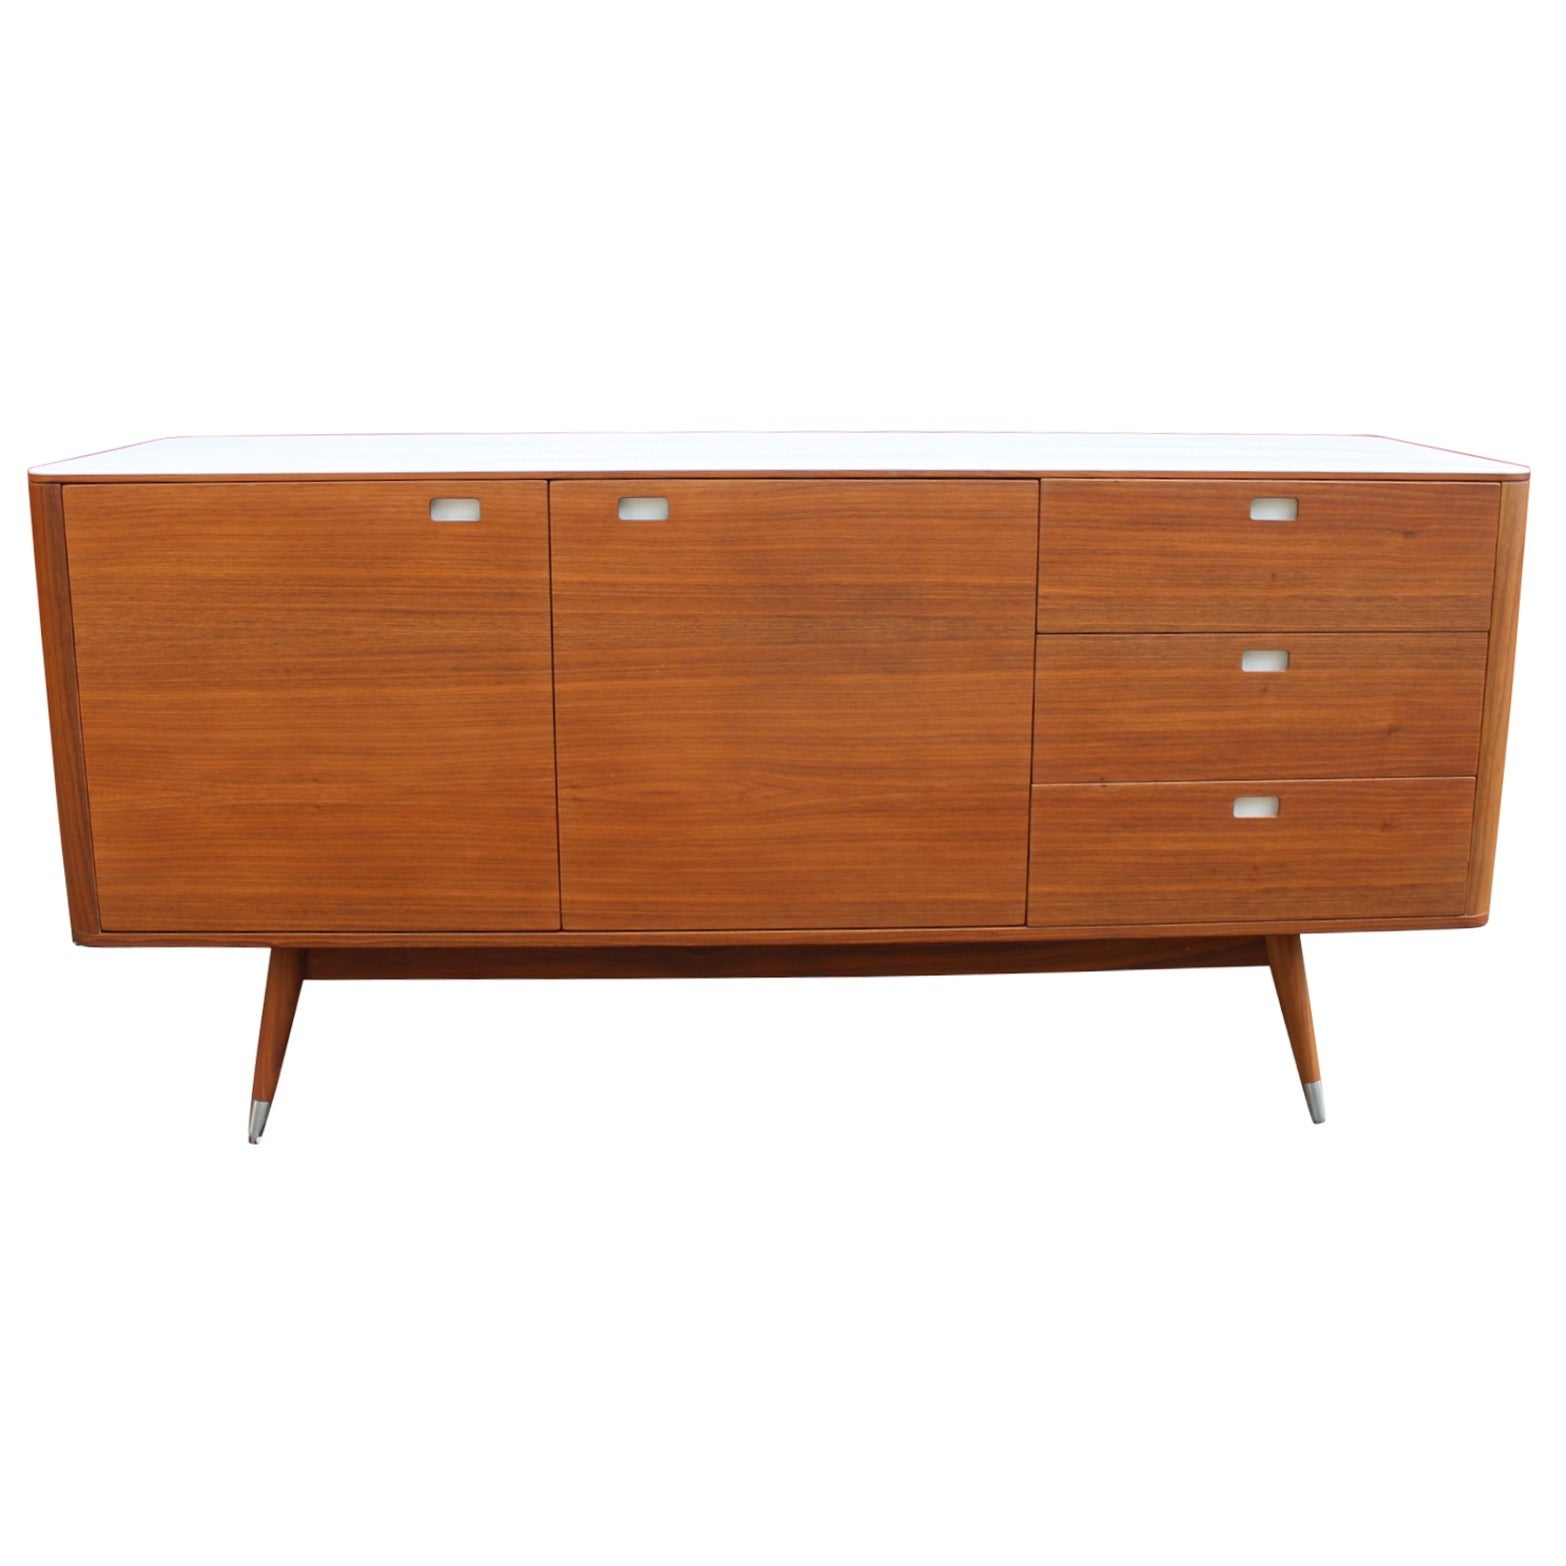 Naver Sideboard Model AK 2630-2660 Designed by Nissen and Gehl, circa 2014